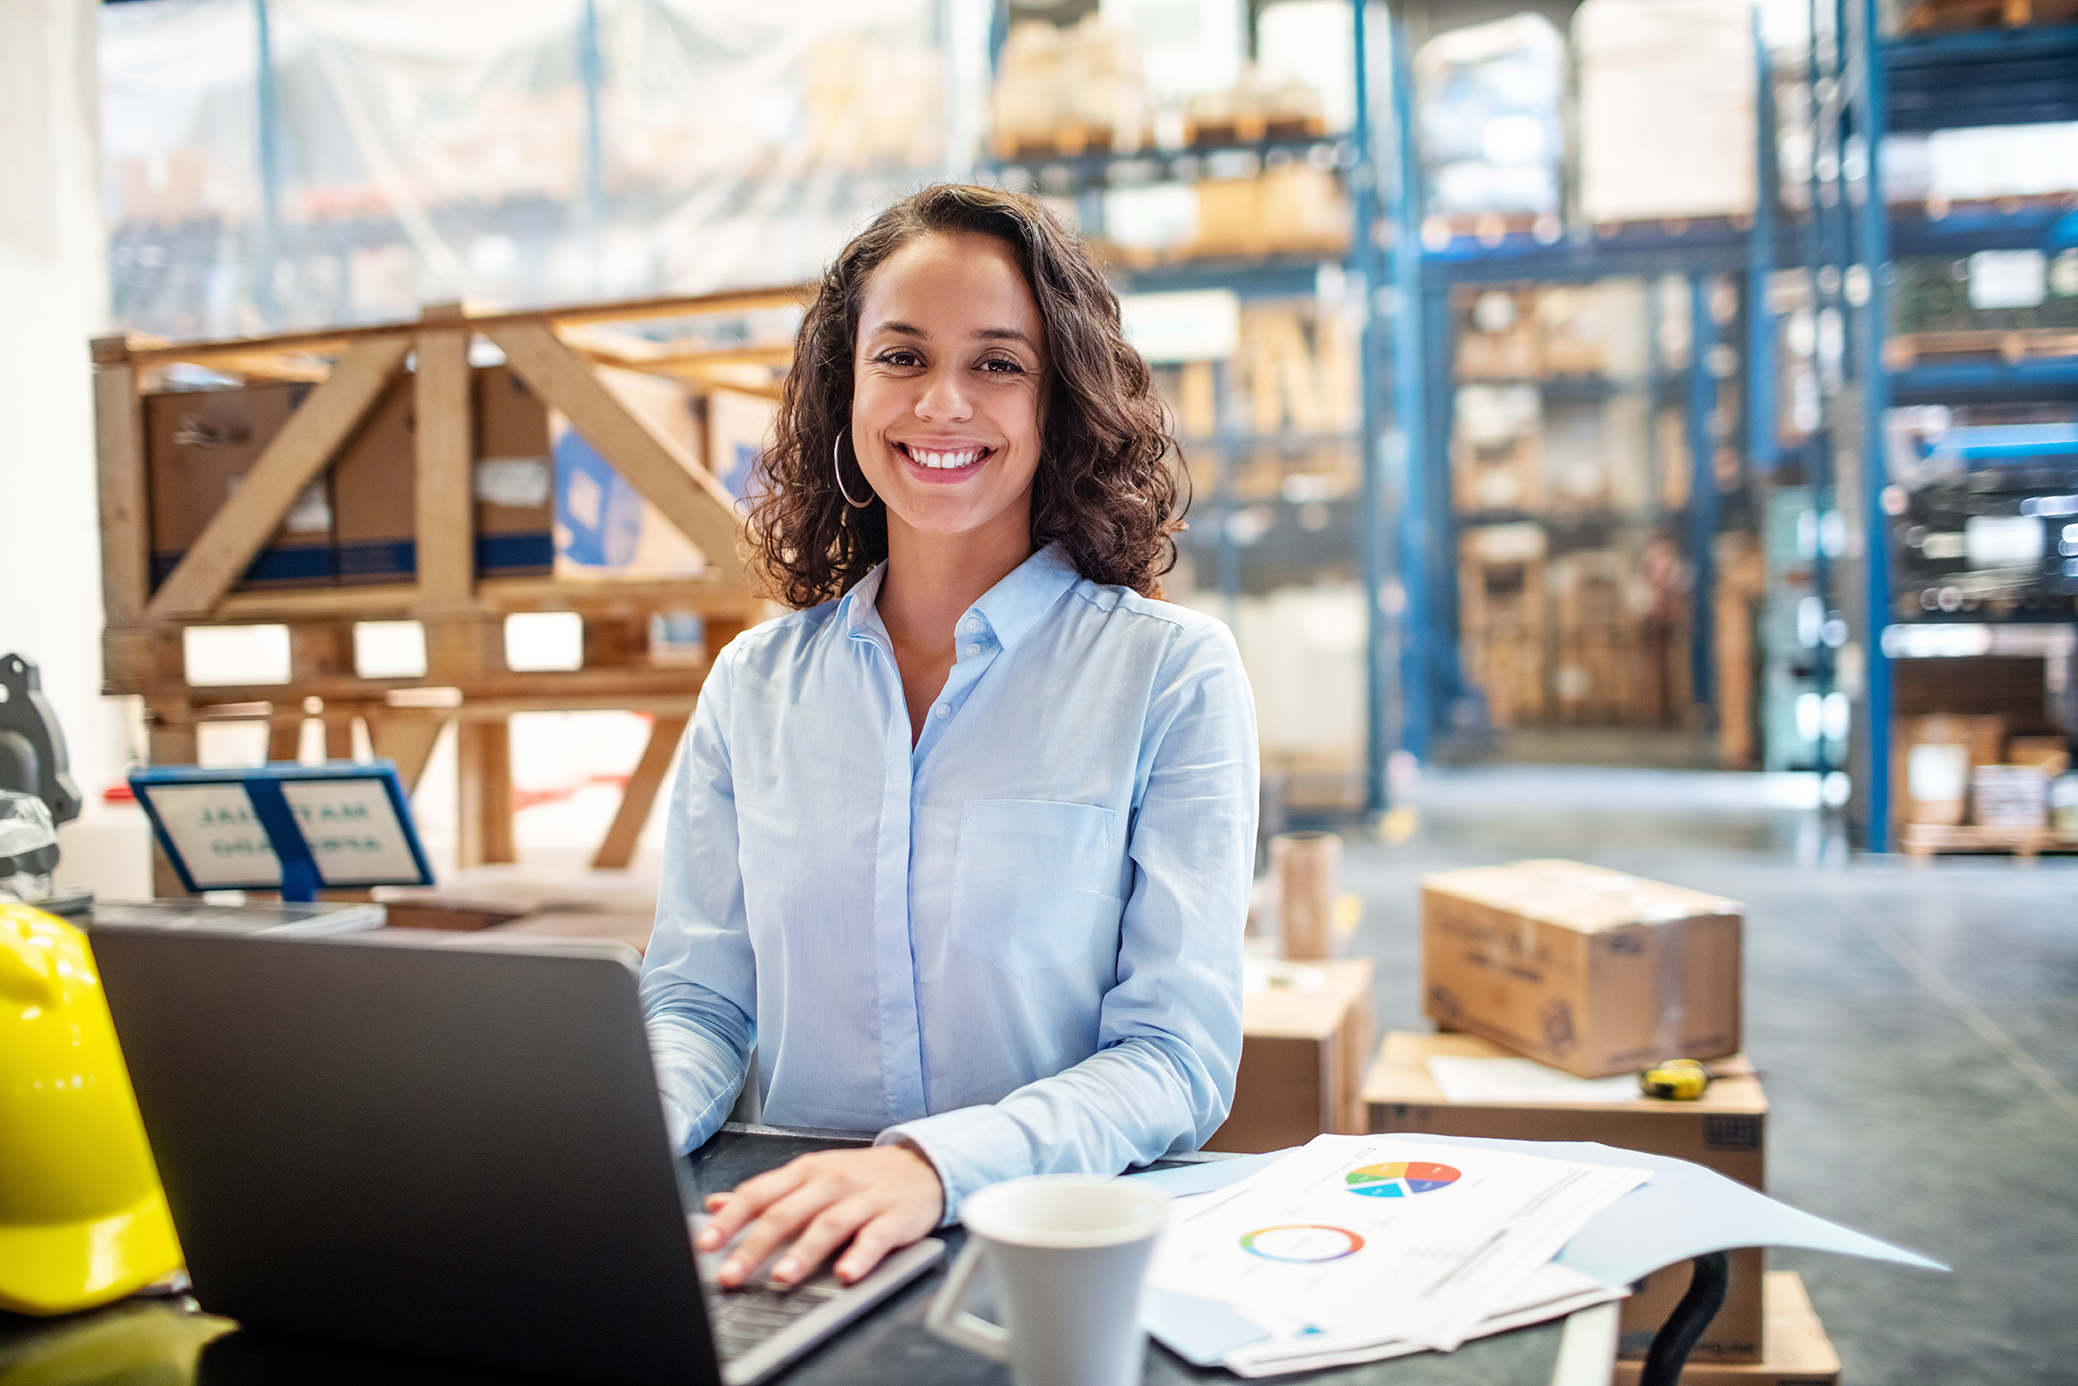 Smiling business woman working on laptop at a warehouse. Businesswoman with a laptop working at a distribution warehouse.